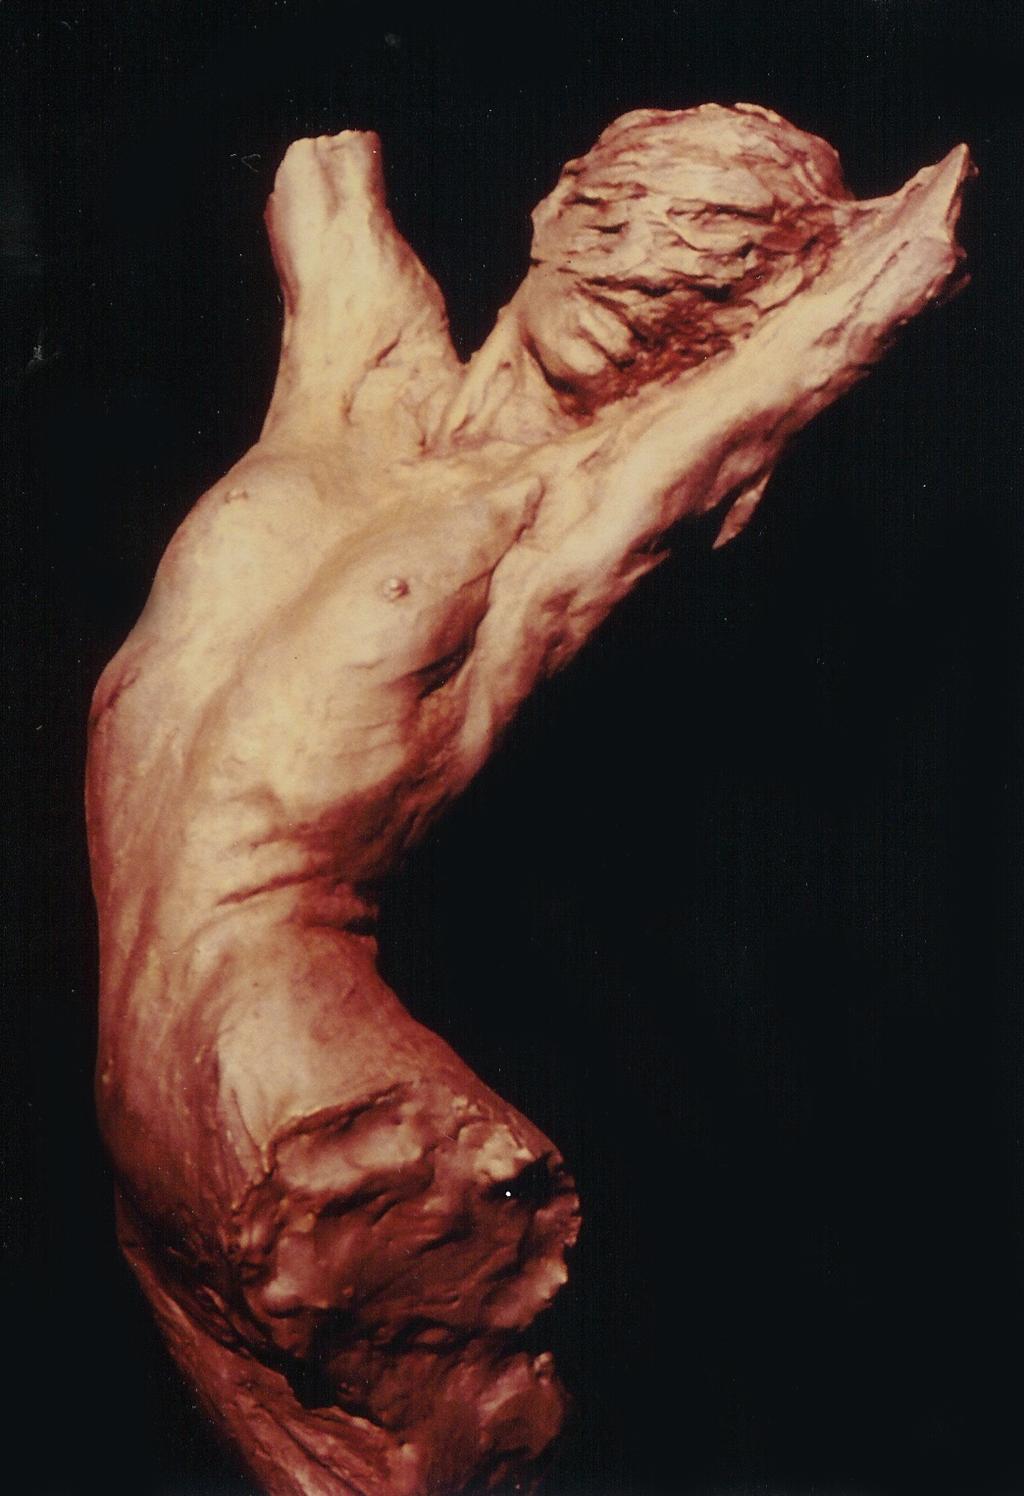 INSTRUCTOR Cristina Mikulasek has studied the human subject as an anatomist and creative artist for over forty years.